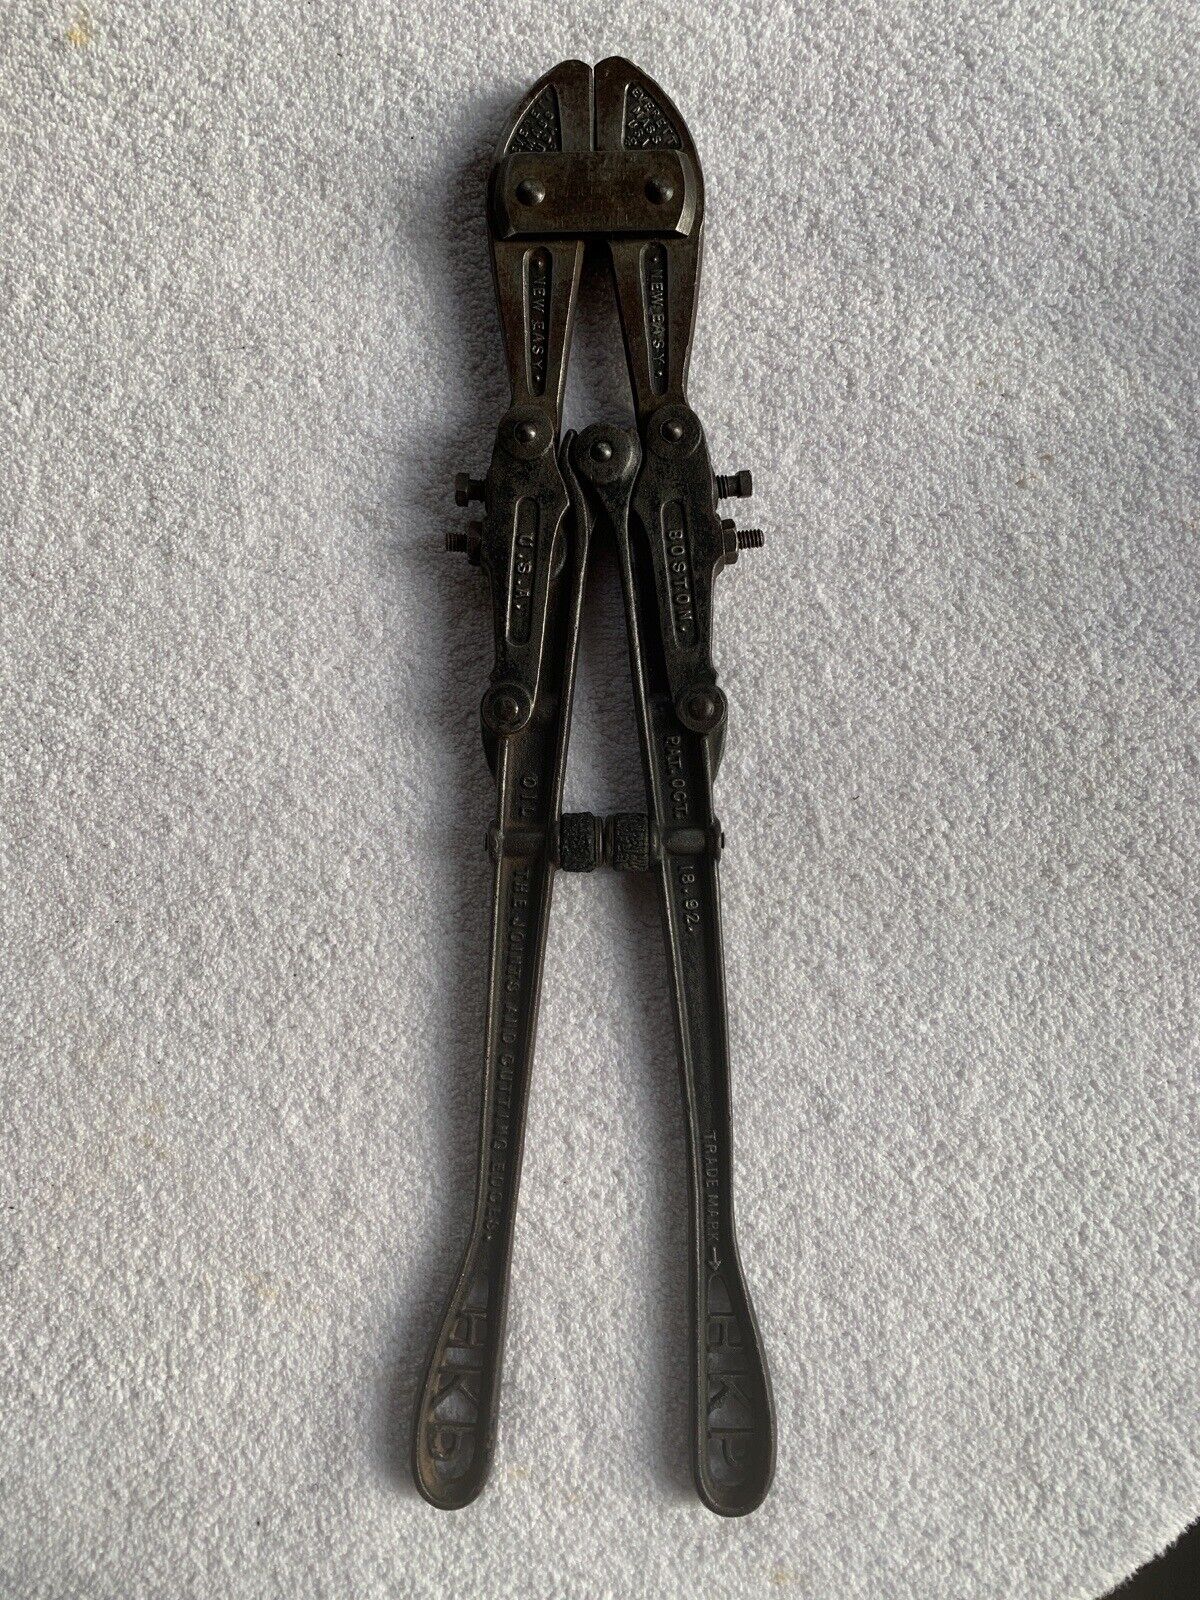 Antique H.K. Porter\'s “New Easy” Bolt Cutter No. 0 Made In Boston USA 1892 Steel